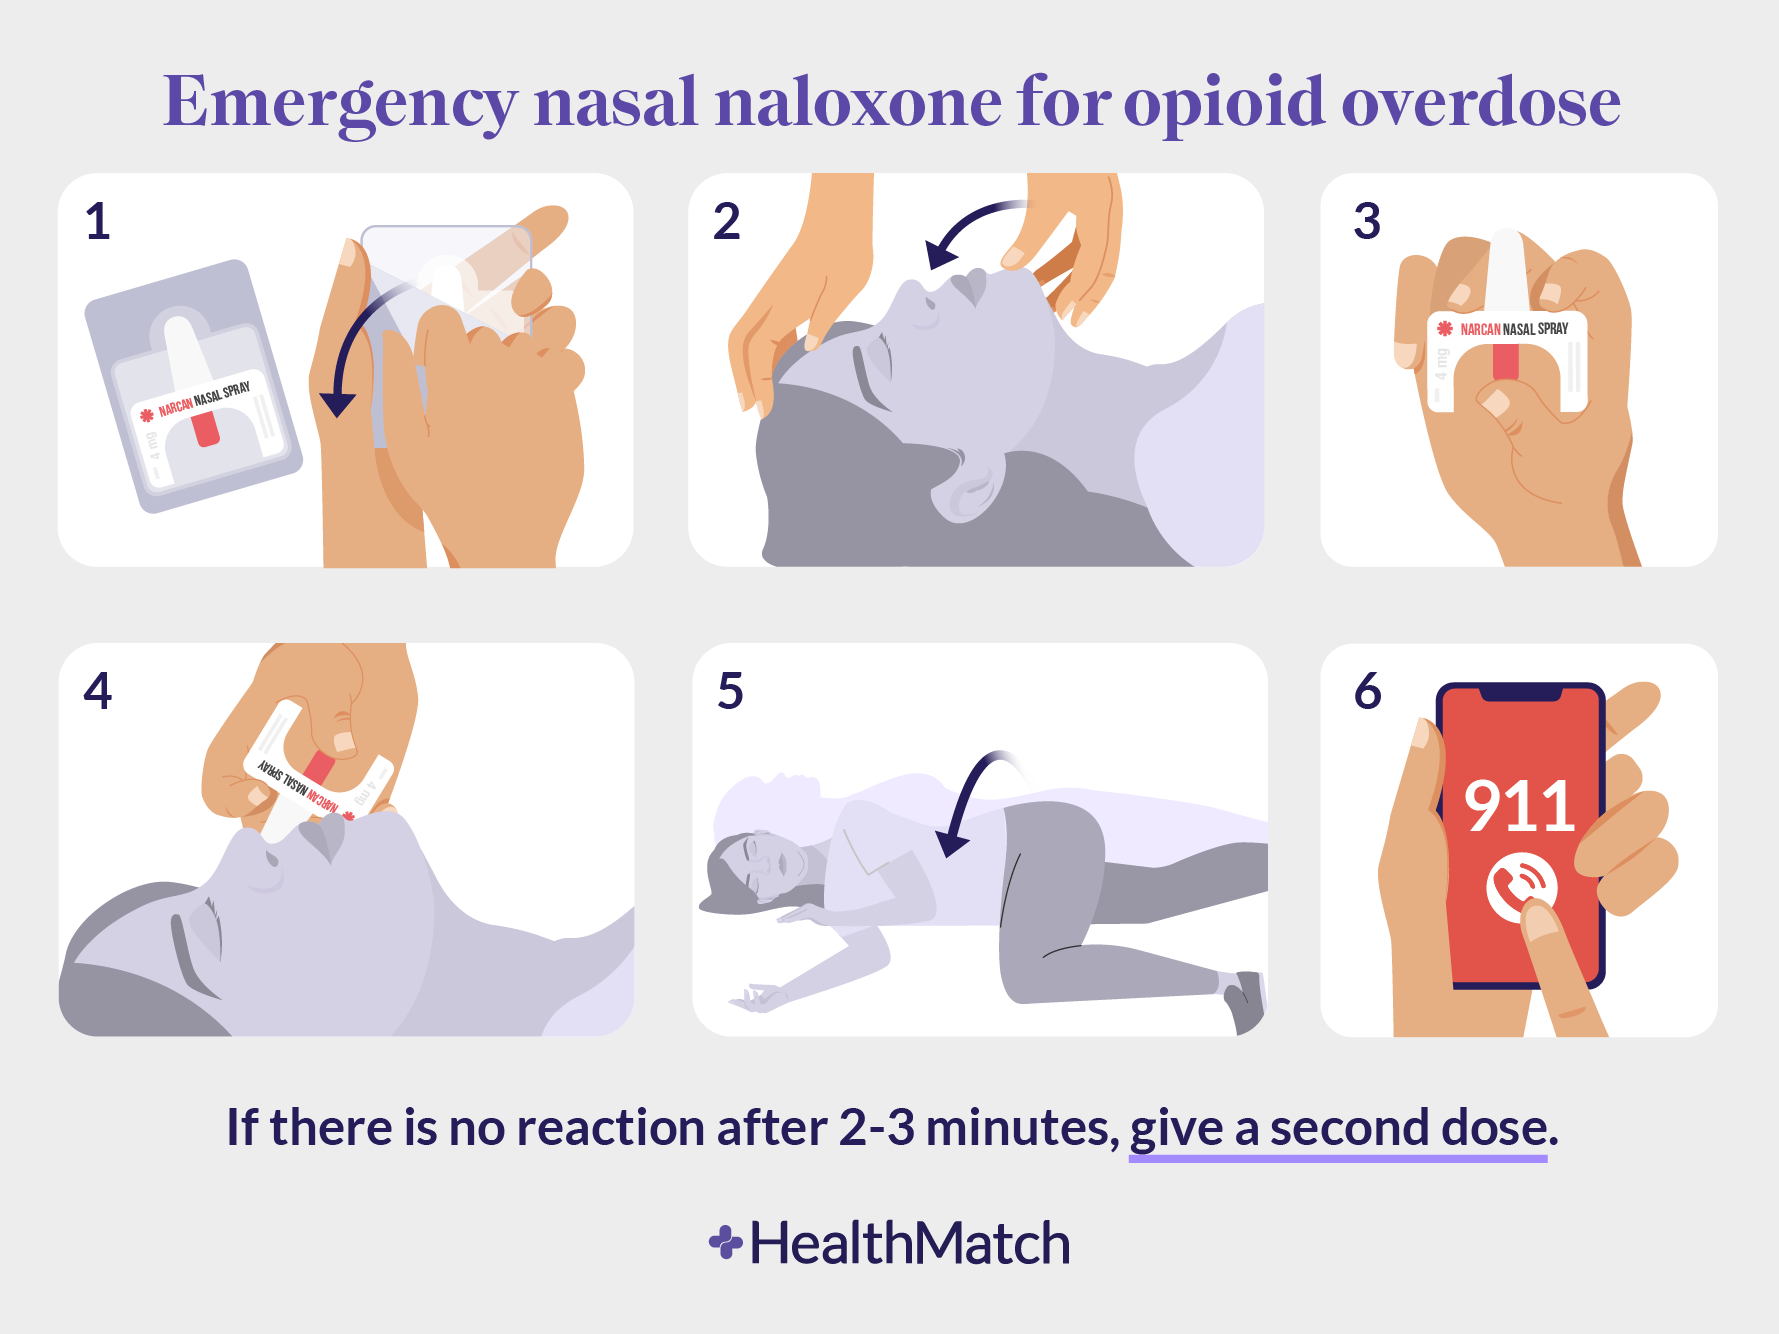 How to Use Narcan to Reverse an Opioid Overdose